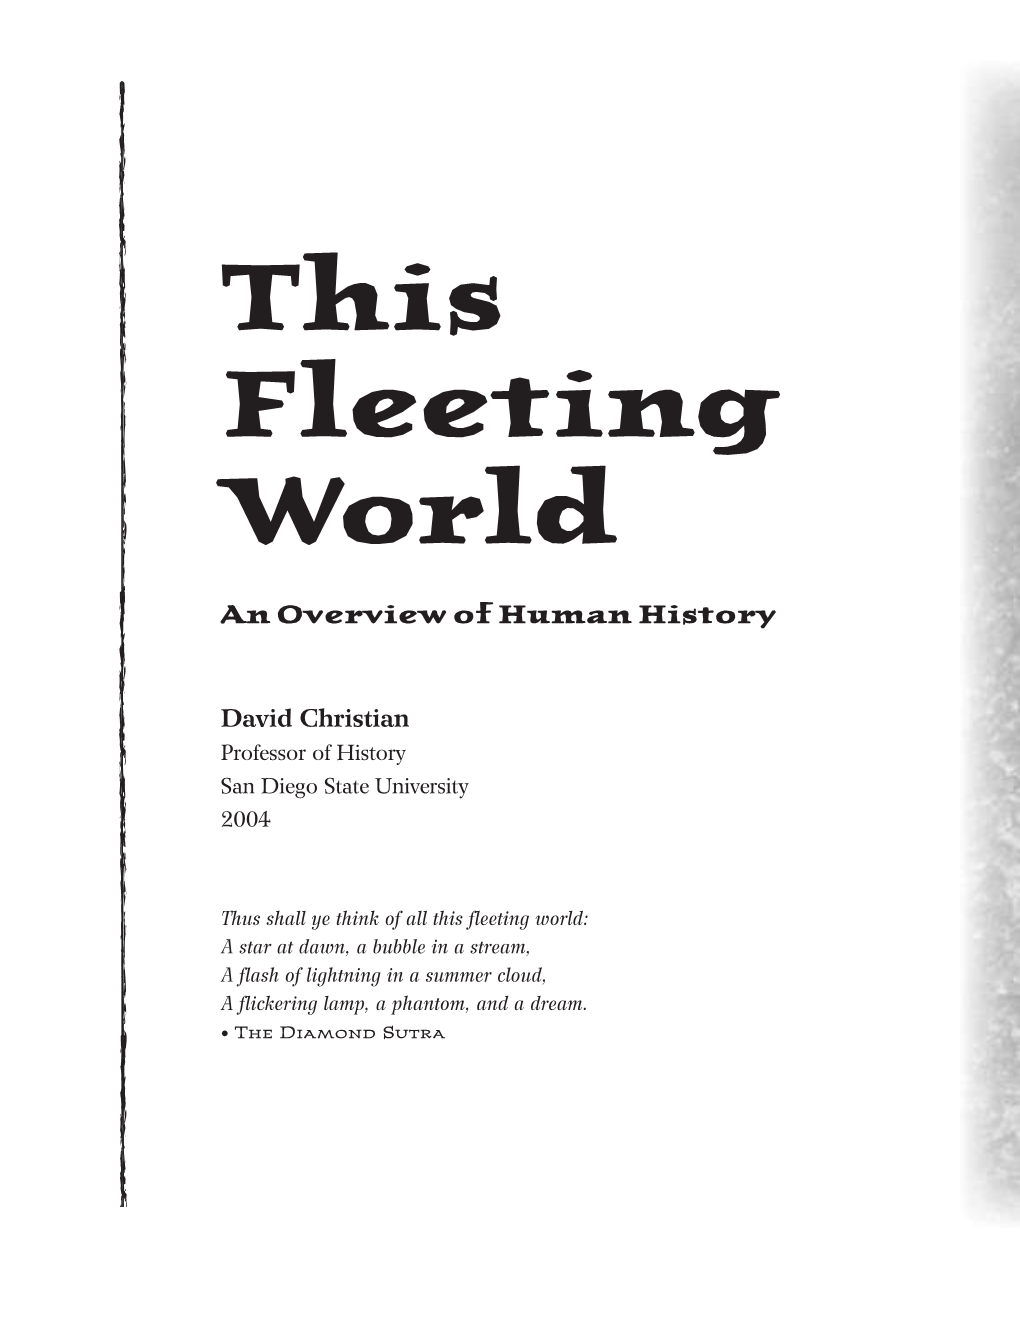 This Fleeting World--An Overview of Human History by David Christian.Pdf